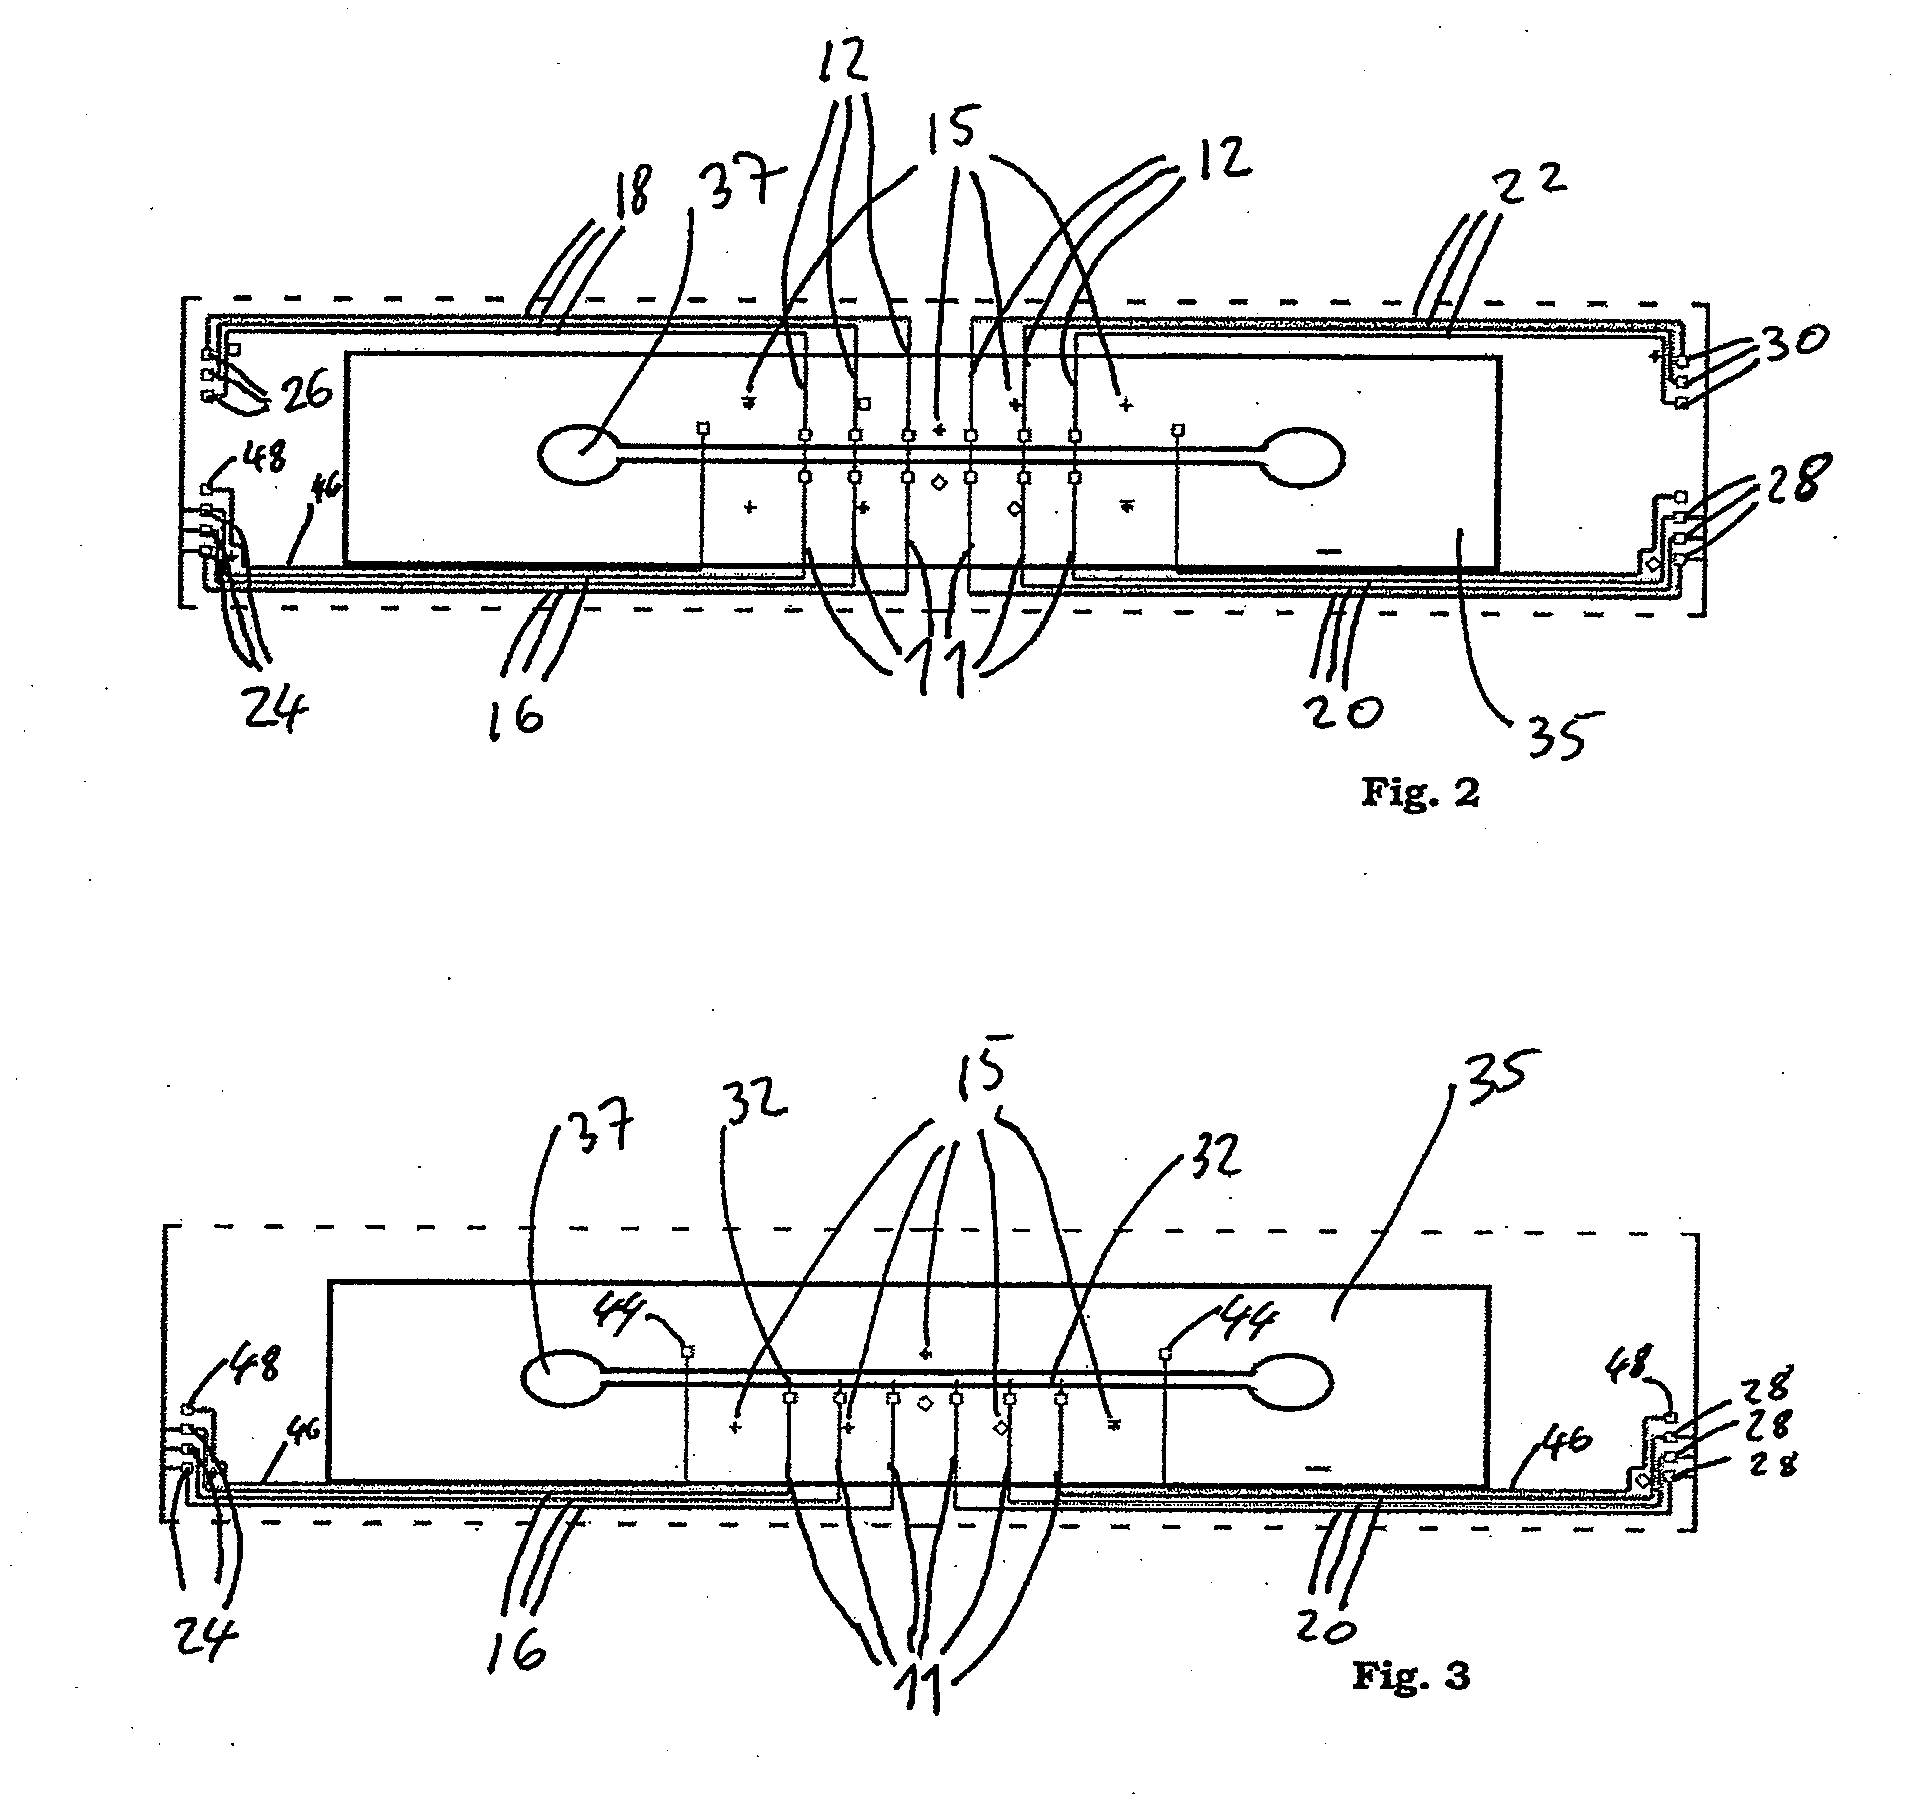 Apparatus and method for detecting one or more analytes